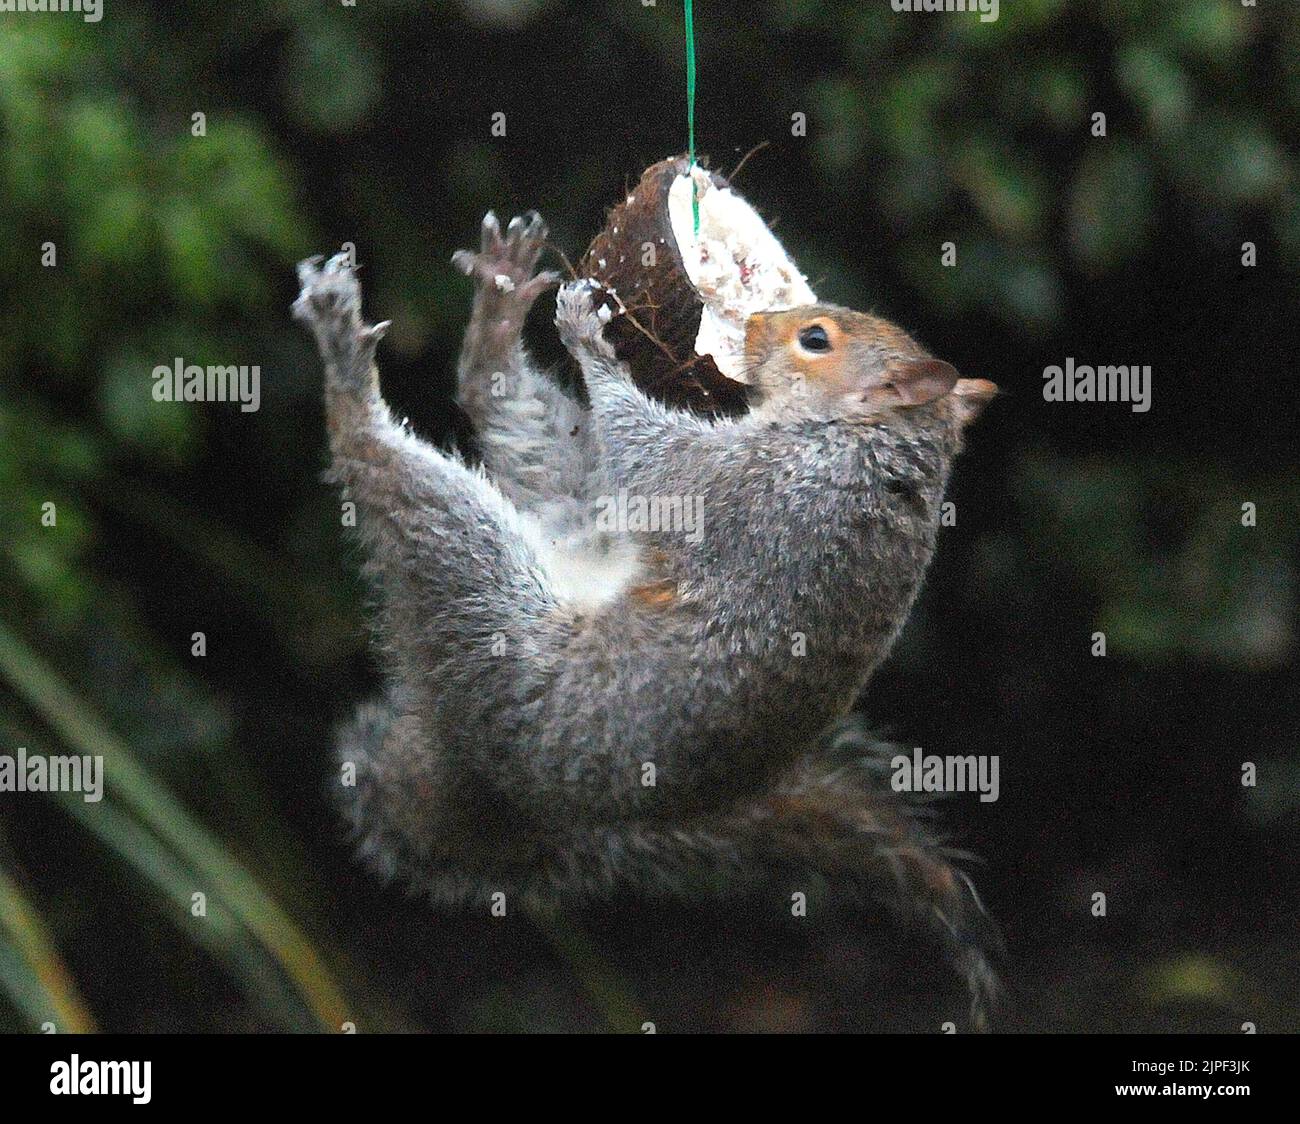 There's more than one way to crack a nut.  A grey squirrel hangs by its toesthen clings  on grimly to the swinging nut and still manages a bite to eat. The acrobatic tufty got the better of Alice Hancock's  scheme to stop squirrels stealing coconuts put out for the birds in  her garden at Hindhead, Surrey. Alice, 38, rigged up a pole and suspended the nut from it out of the squirrels reach but it took just a few minutes for the cheeky grey to work out how to get dinner. Alice said ''I'm determined to get the better of him but its back to the drawing board in my battle of wits with the little p Stock Photo